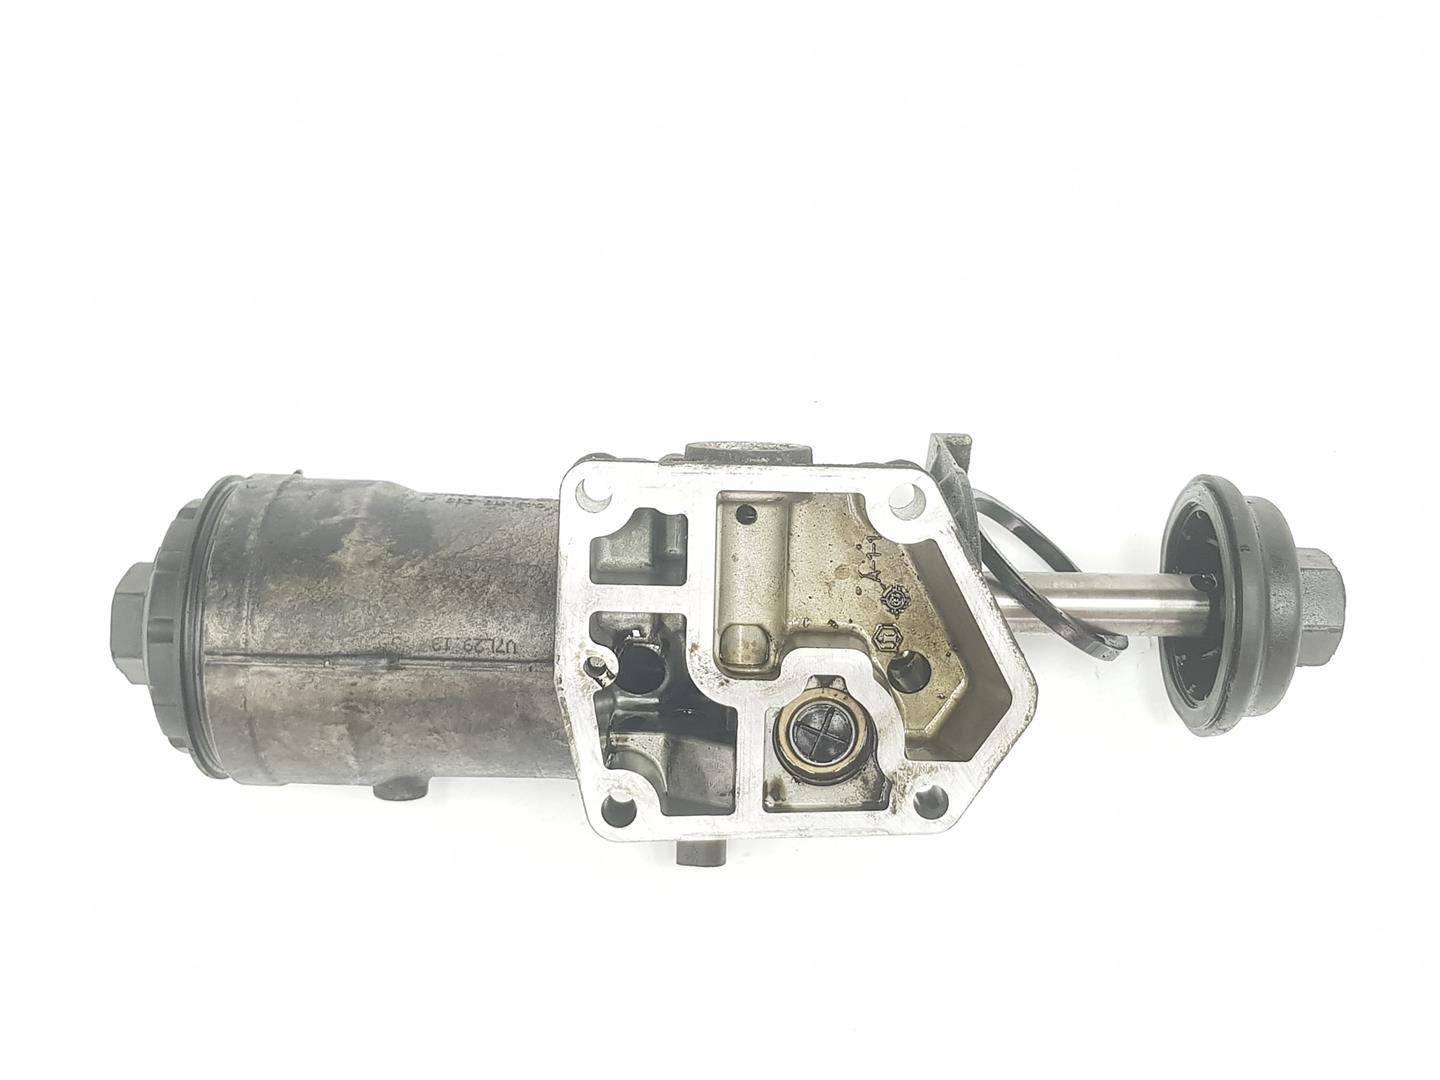 VOLKSWAGEN Touran 1 generation (2003-2015) Other Engine Compartment Parts 045115389J, 045115389H, 1111AA 21675704